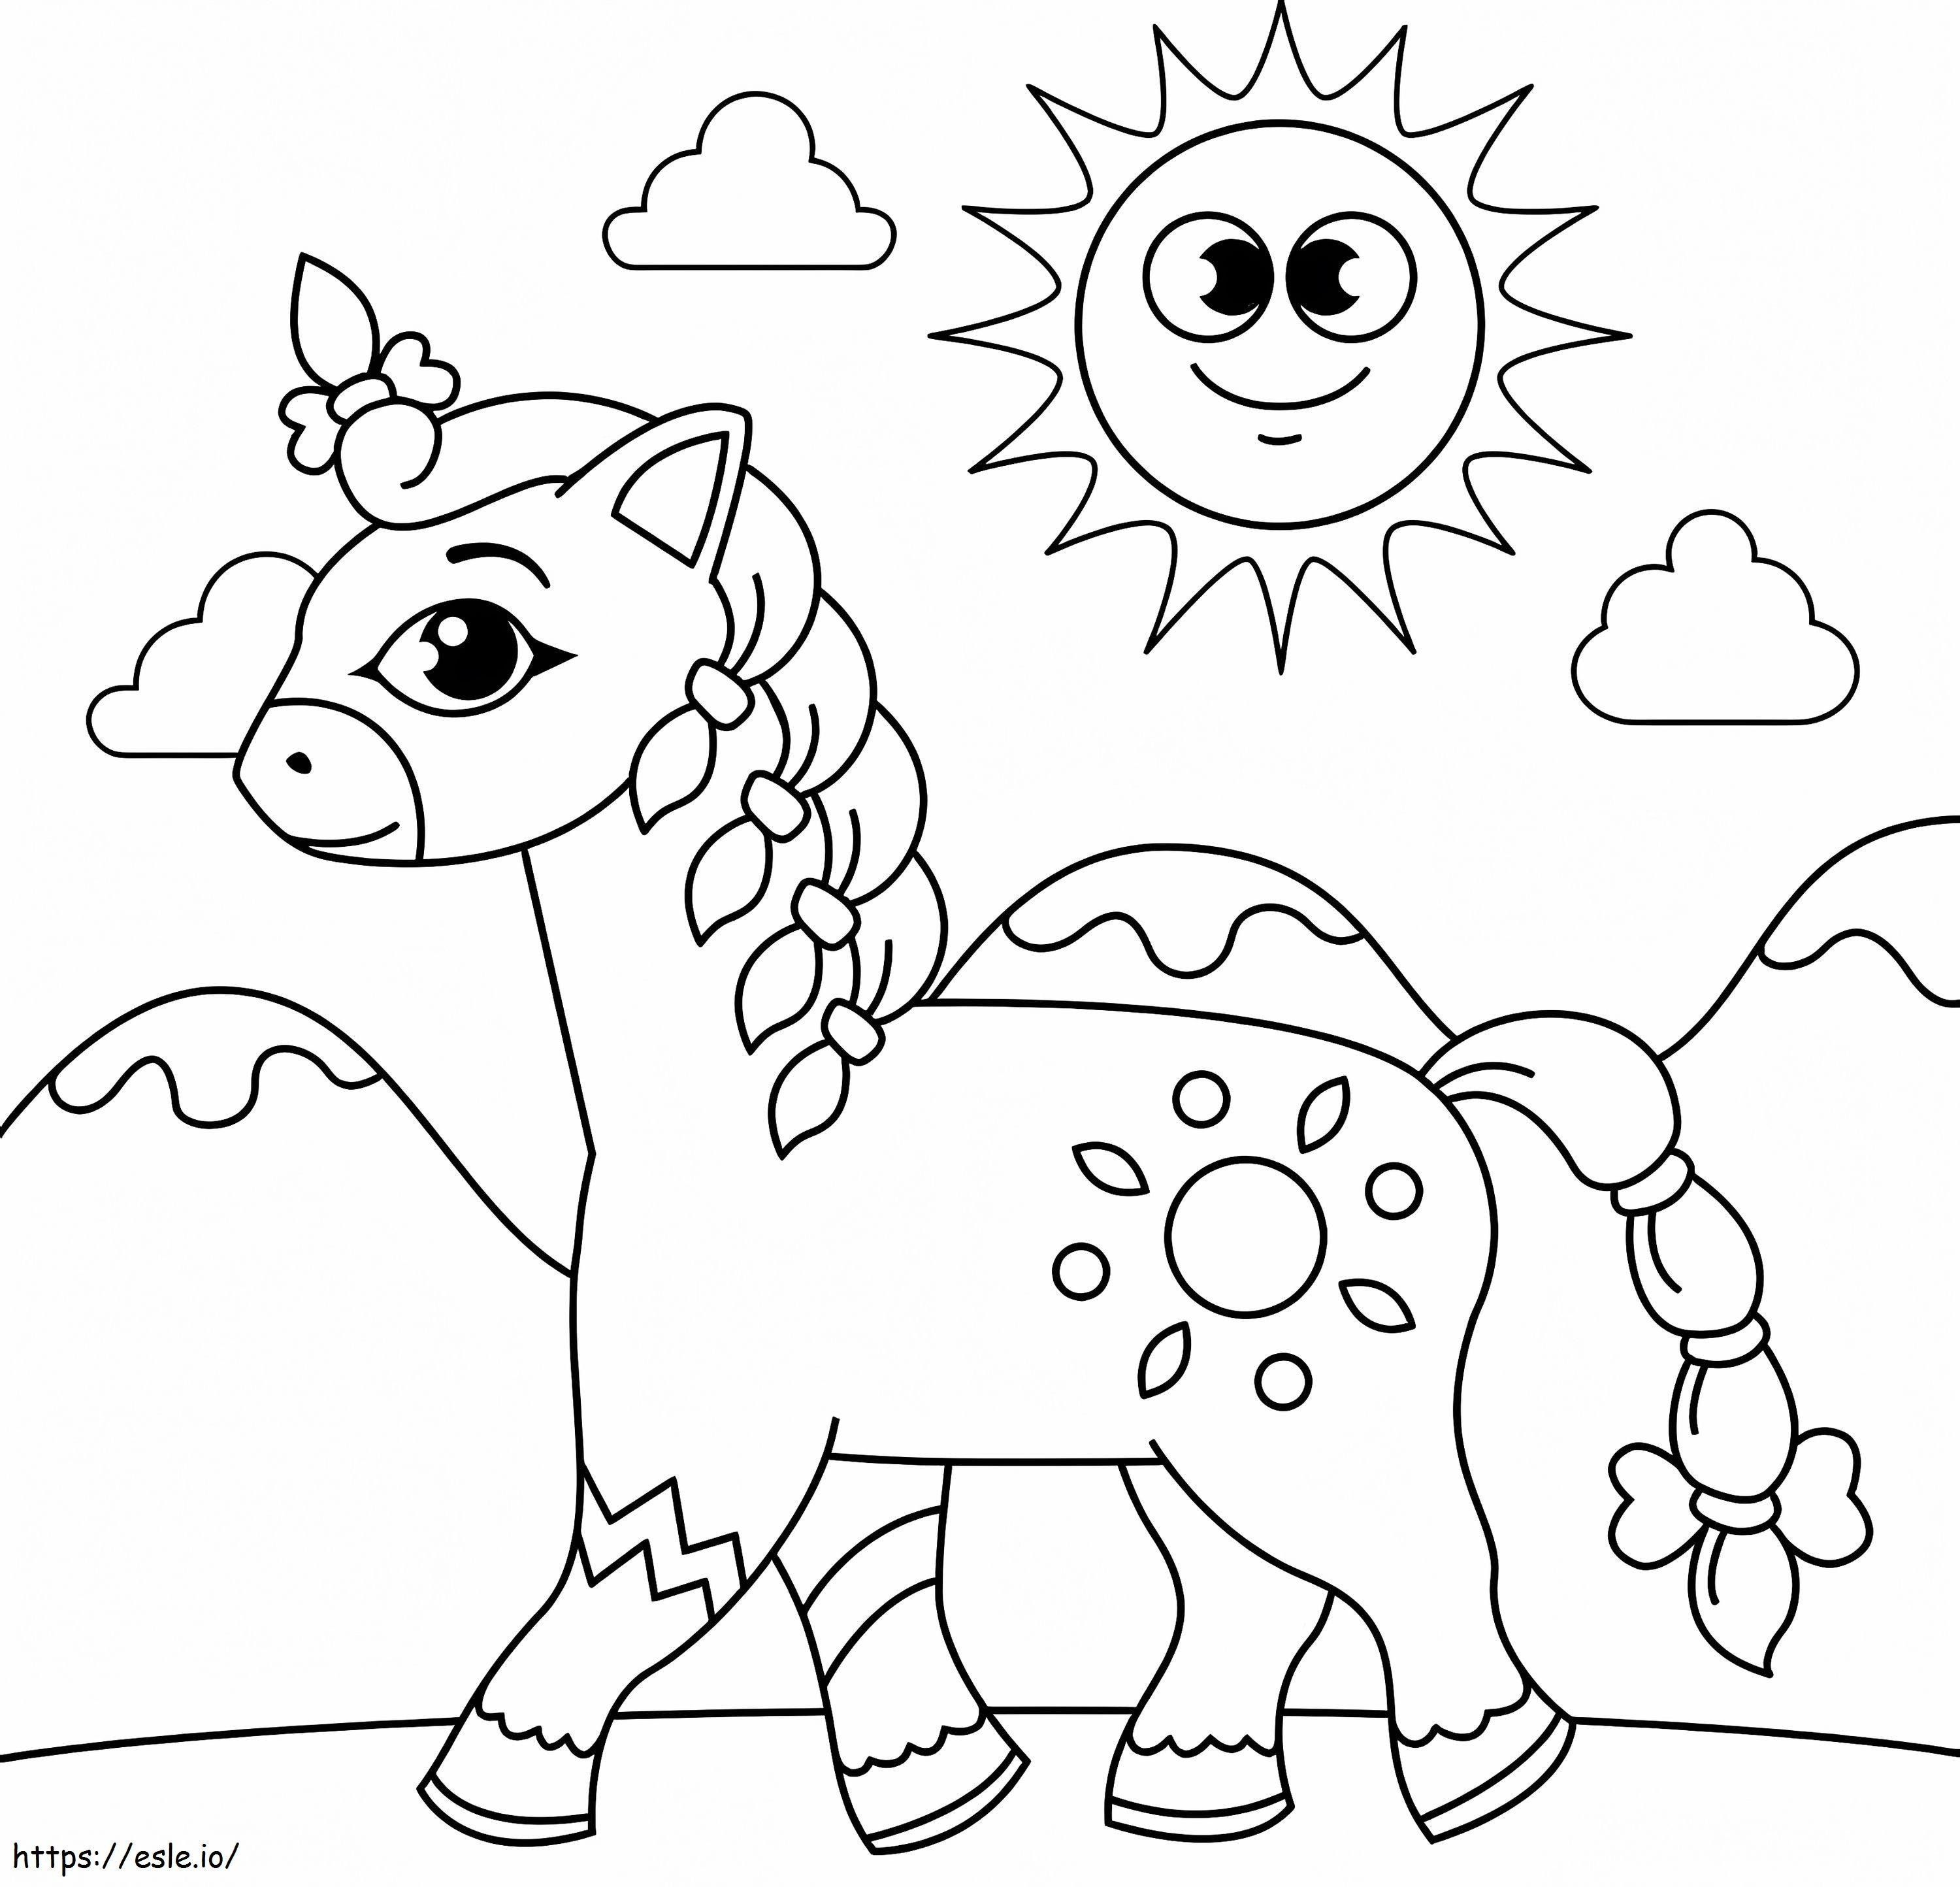 Horse And Sun coloring page